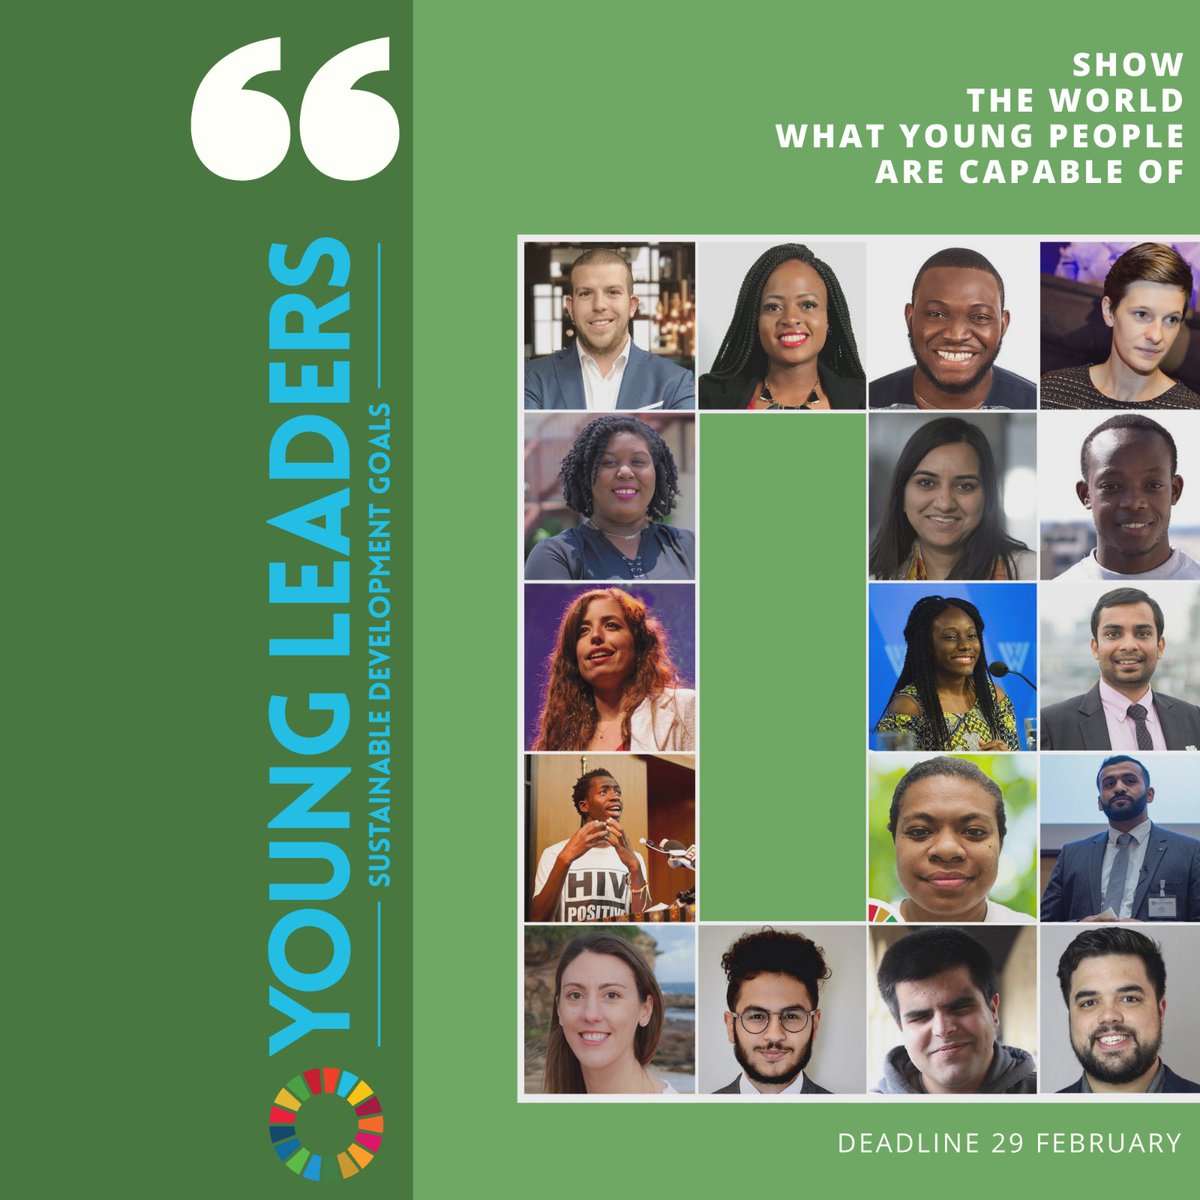 Every two years, 17 young change-makers are recognized for their leadership and contribution to the #GlobalGoals.

If you're 15-29 years old and passionate about achieving a sustainable future for all, apply to become one of the 2020 #SDGYoungLeaders: bit.ly/SDGYL2020